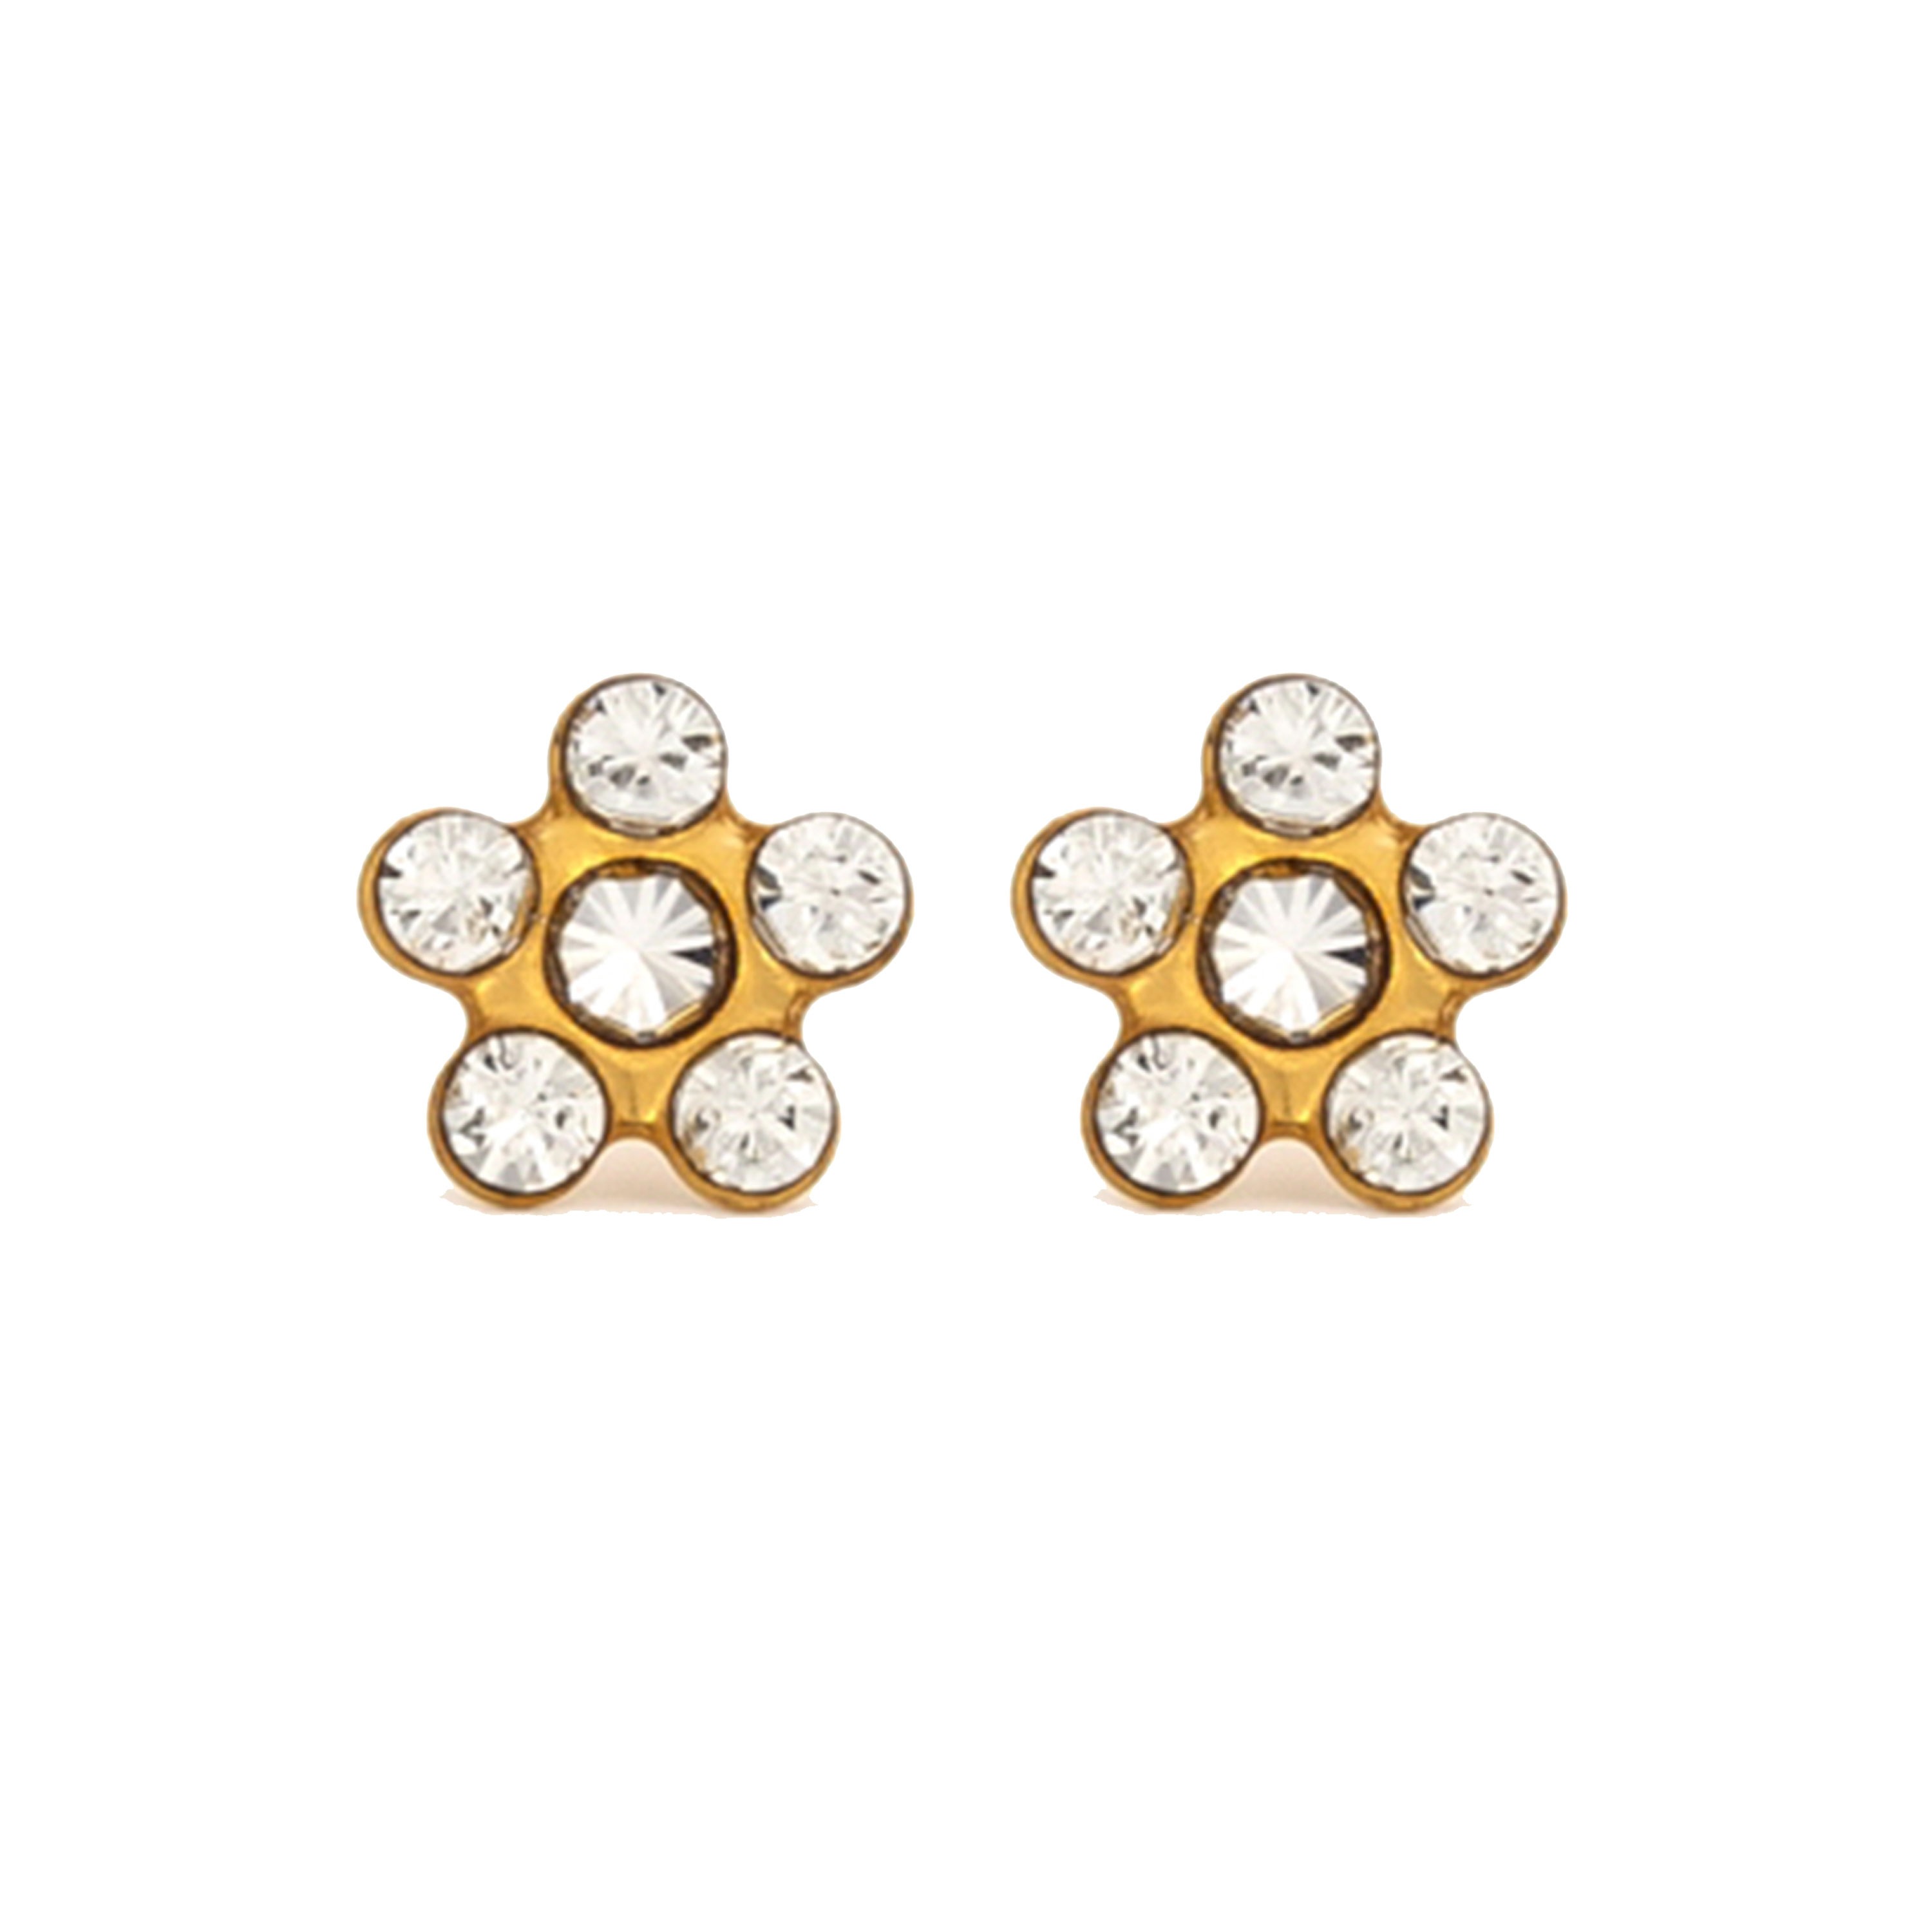 Daisy (Flower) - April Crystal | 24K Pure Gold-Plated Piercing Earrings with Ear Piercing Cartridge | Studex System75